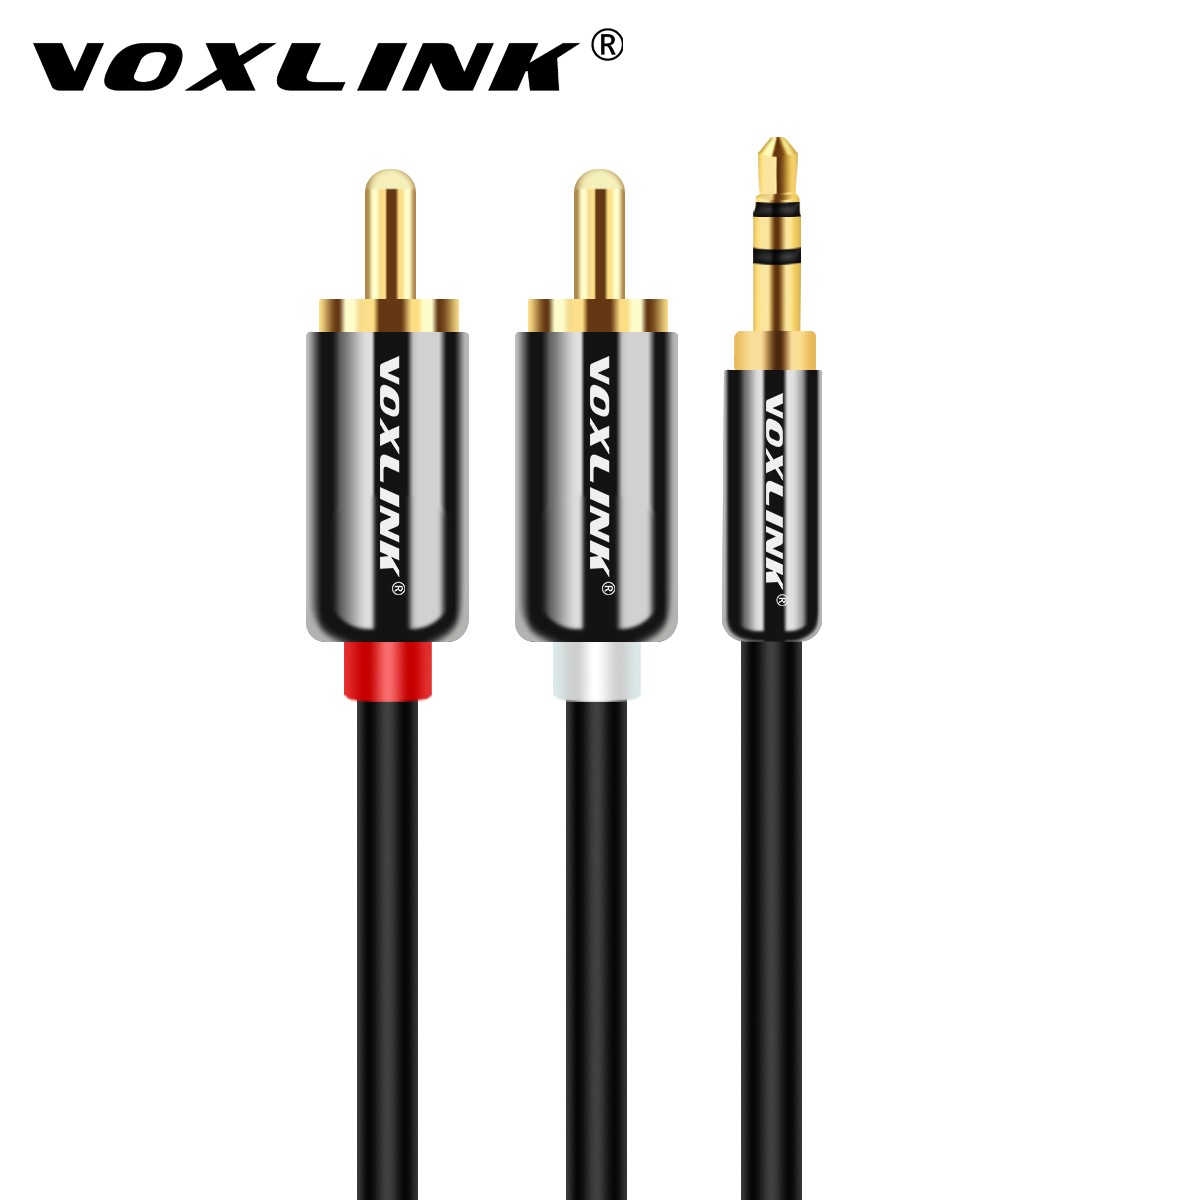 Speakers MP3 。 HDTV and More Tablets 3.5mm Male to 2RCA Male Stereo Audio Adapter Cable Nylon Braided AUX RCA Y Cord for Smartphones RCA Cable 12 ft 12FT-4M 